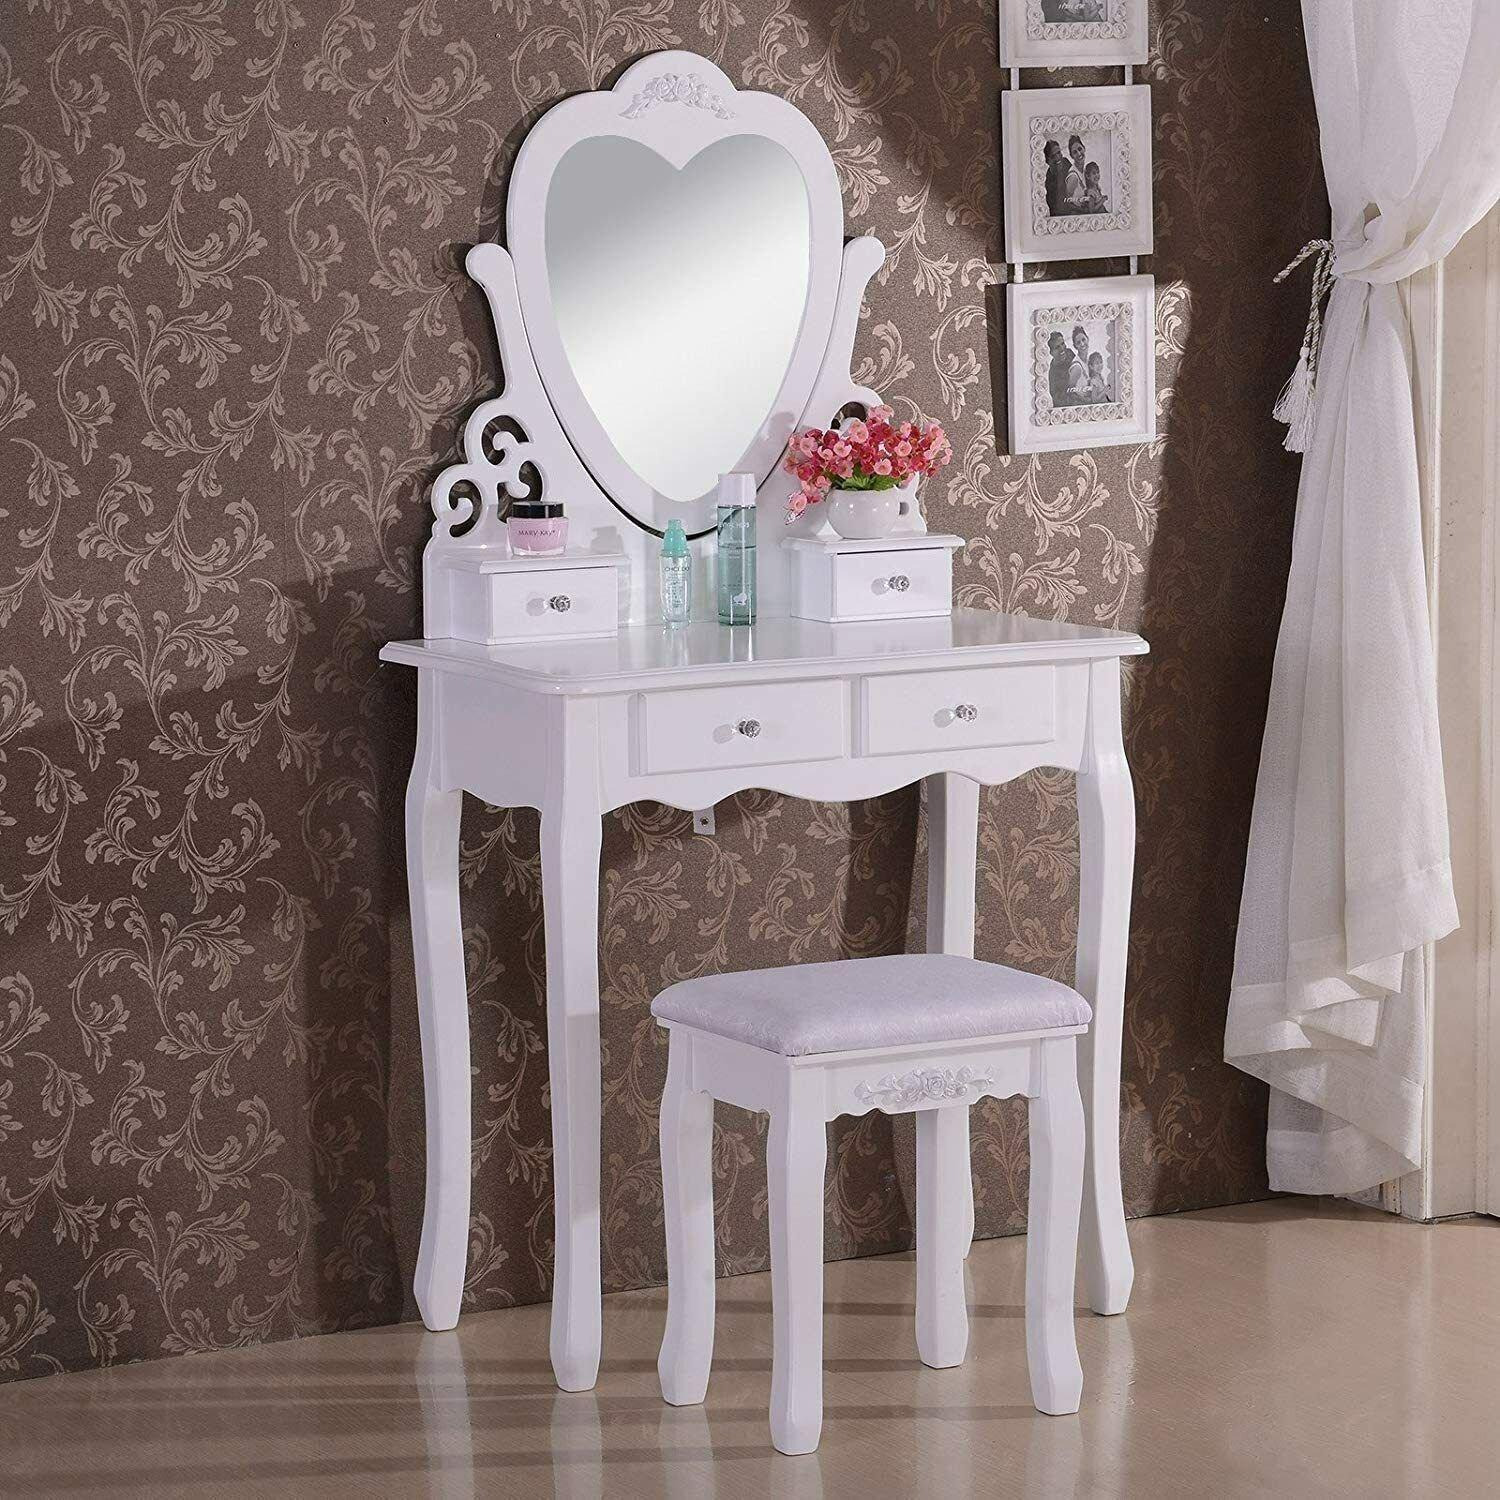 Dressing Table With Mirror Stool Vanity Dresser Bedroom White Love Heart Furniture - image 1